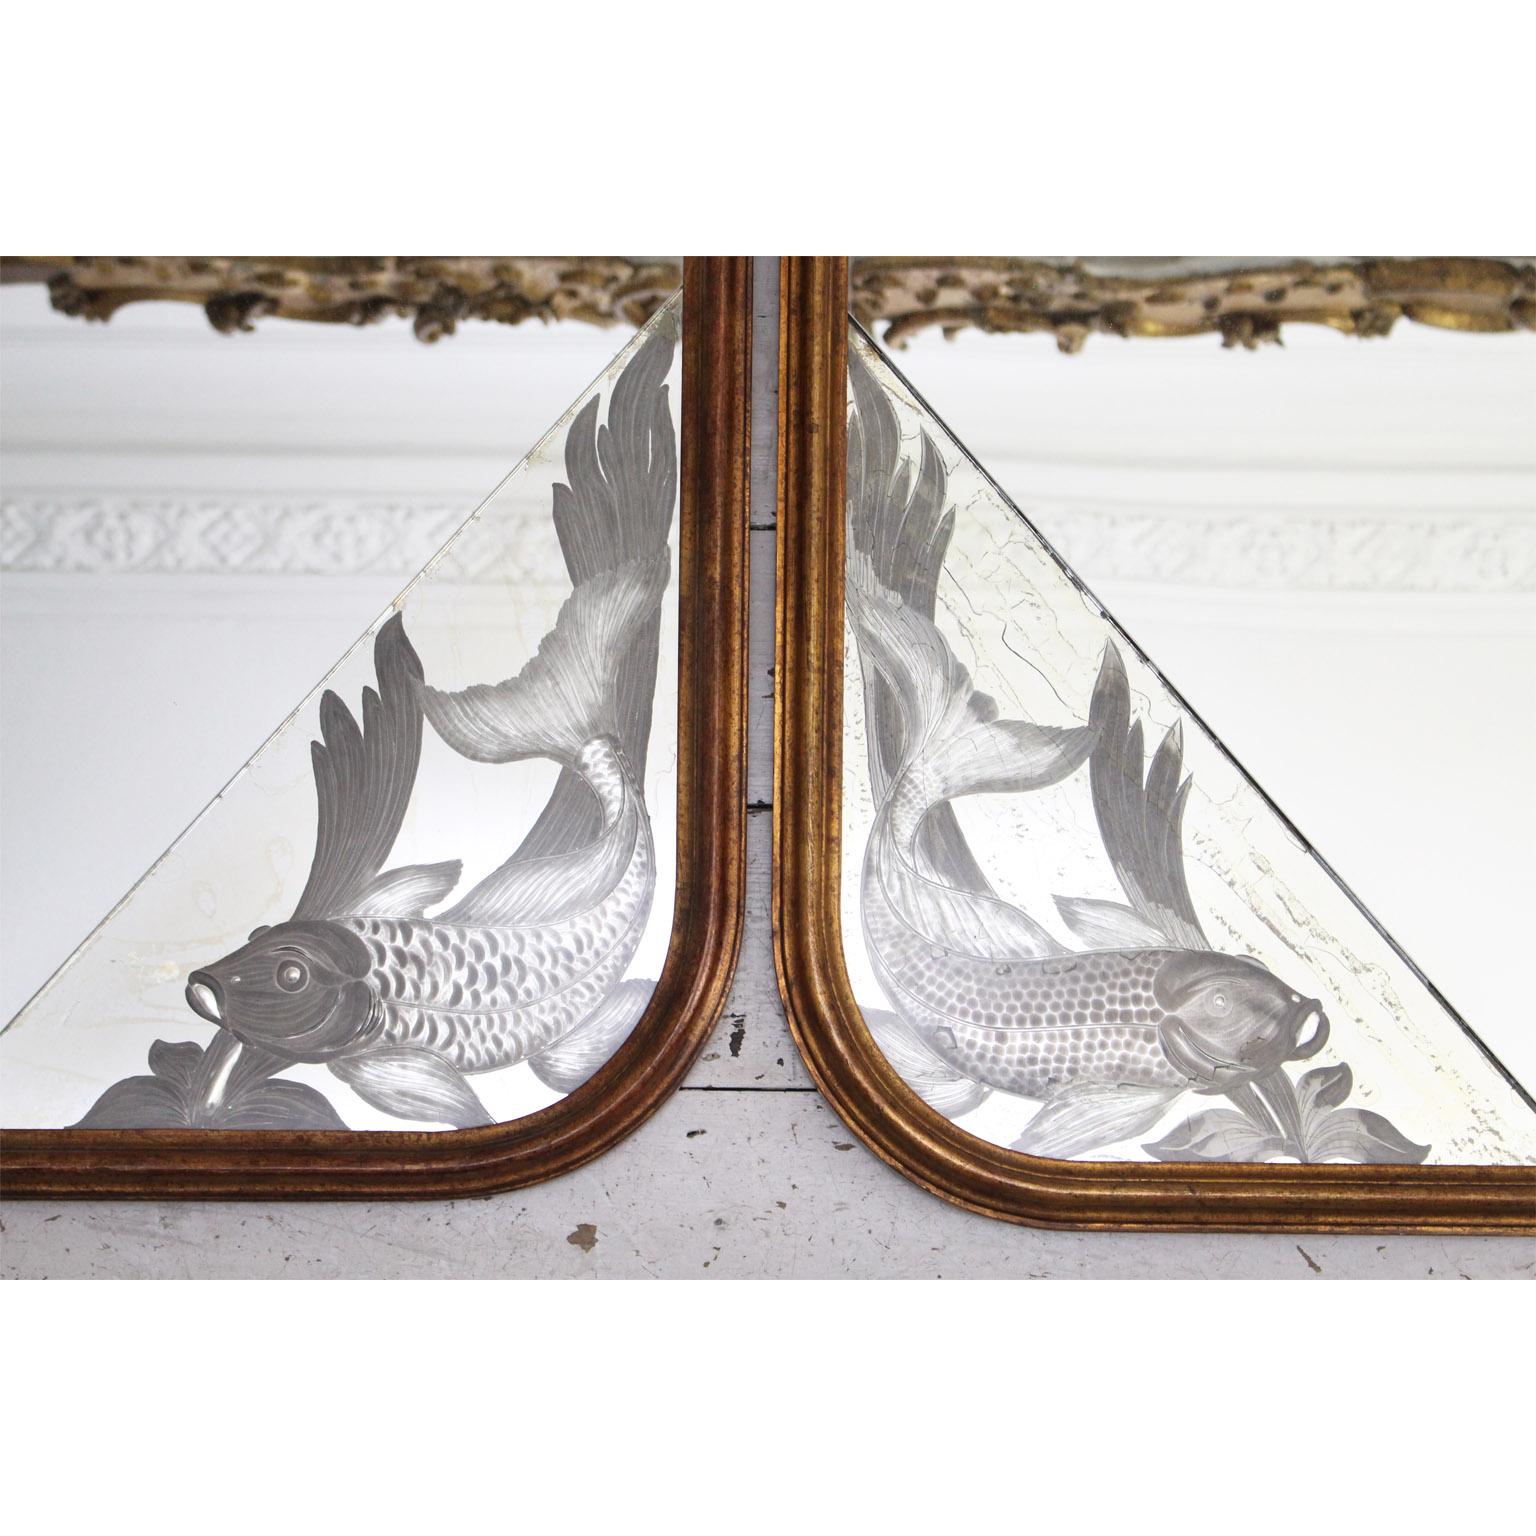 These lovely, decorative mirrors are ornately etched with fish - we have never seen anything quite like them. They were found in a wonderful house in Tuscany. The frames, are gilt with rounded corners. Although a pair, they slightly differ in size